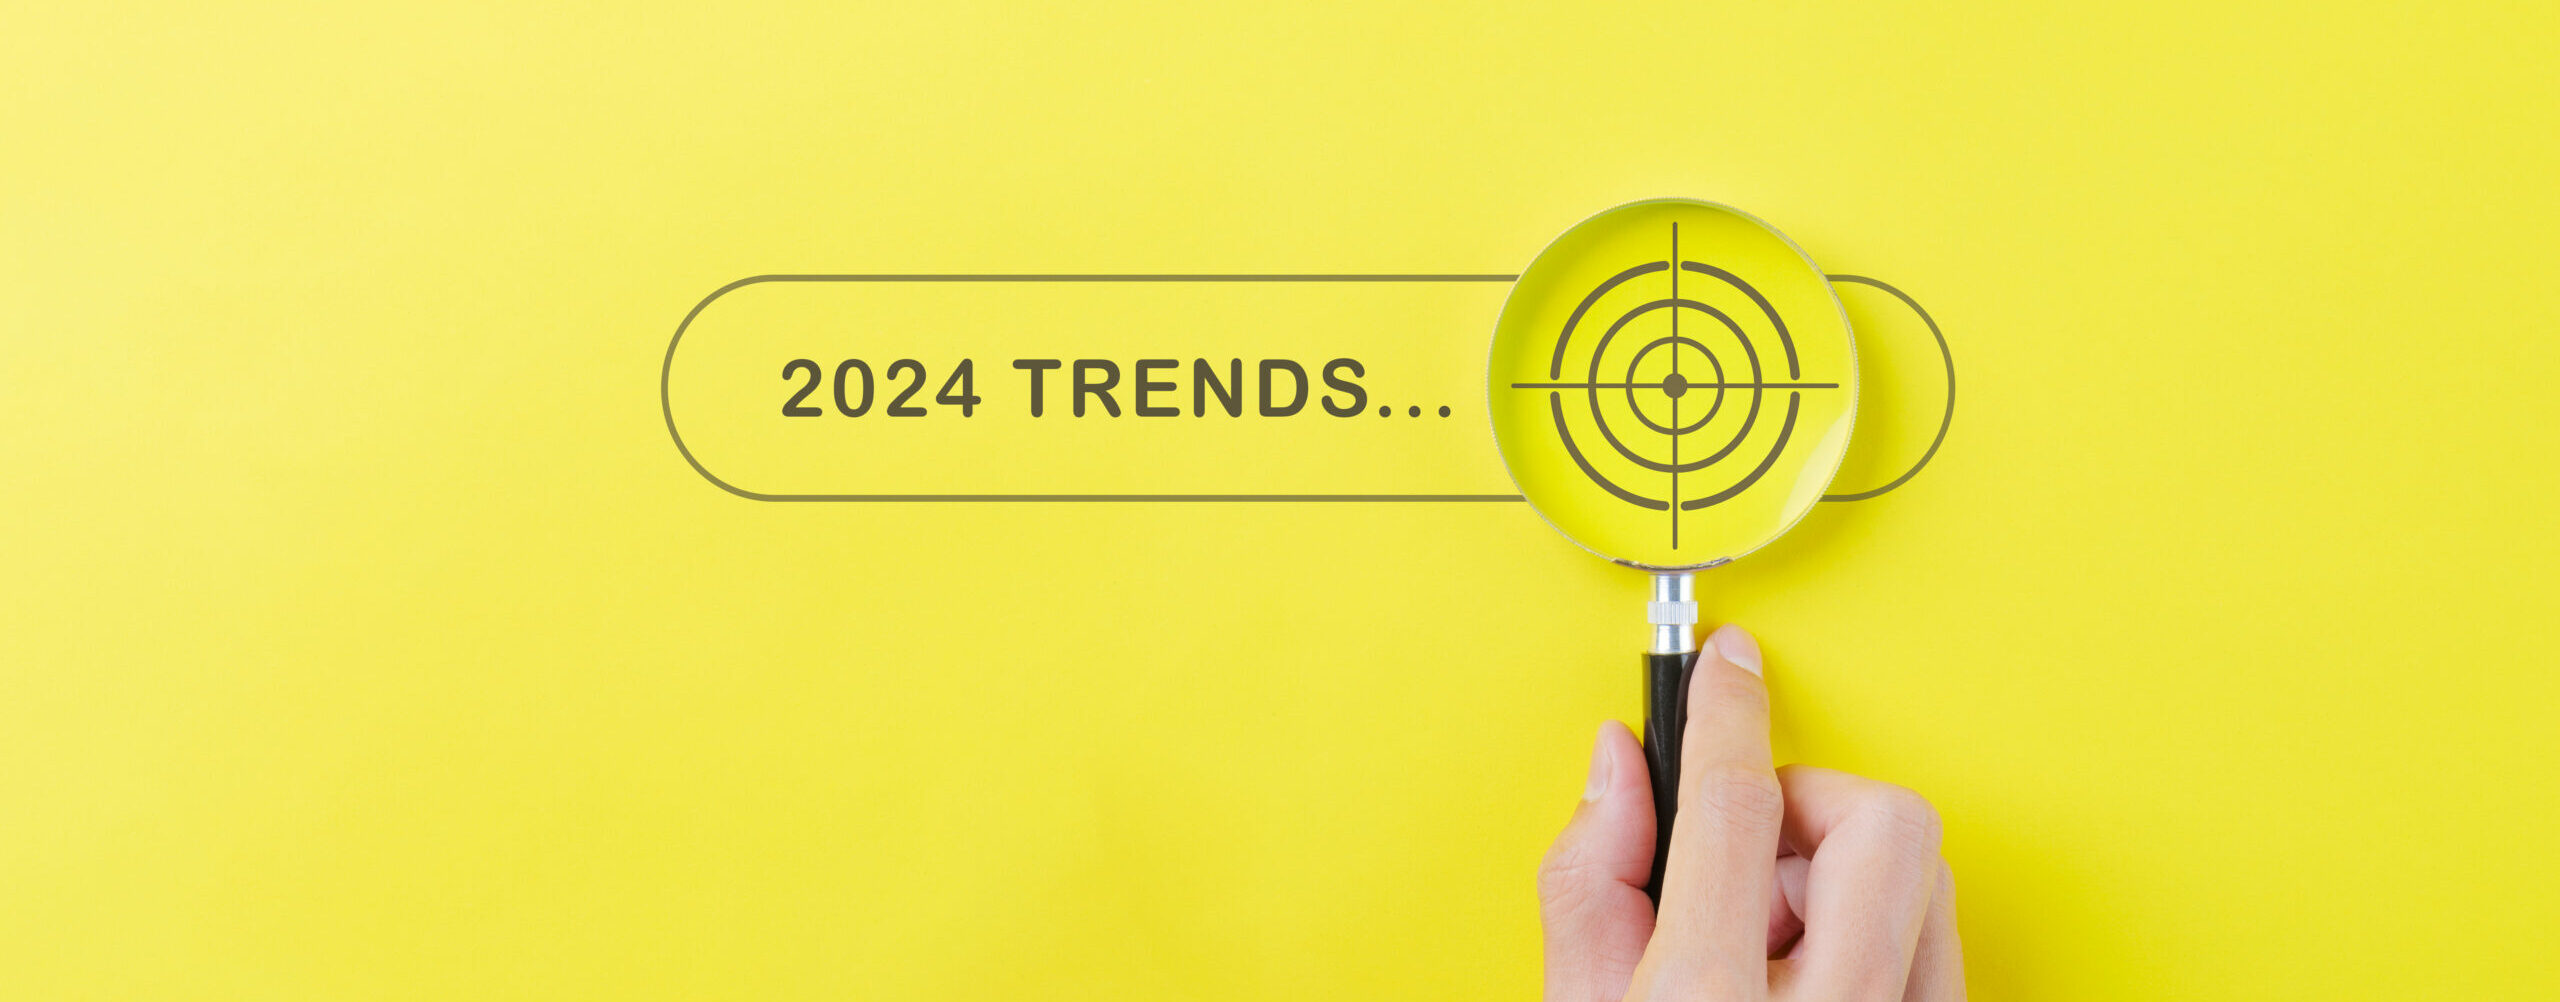 5 supply chain trends in 2024 you shouldn’t Ignore